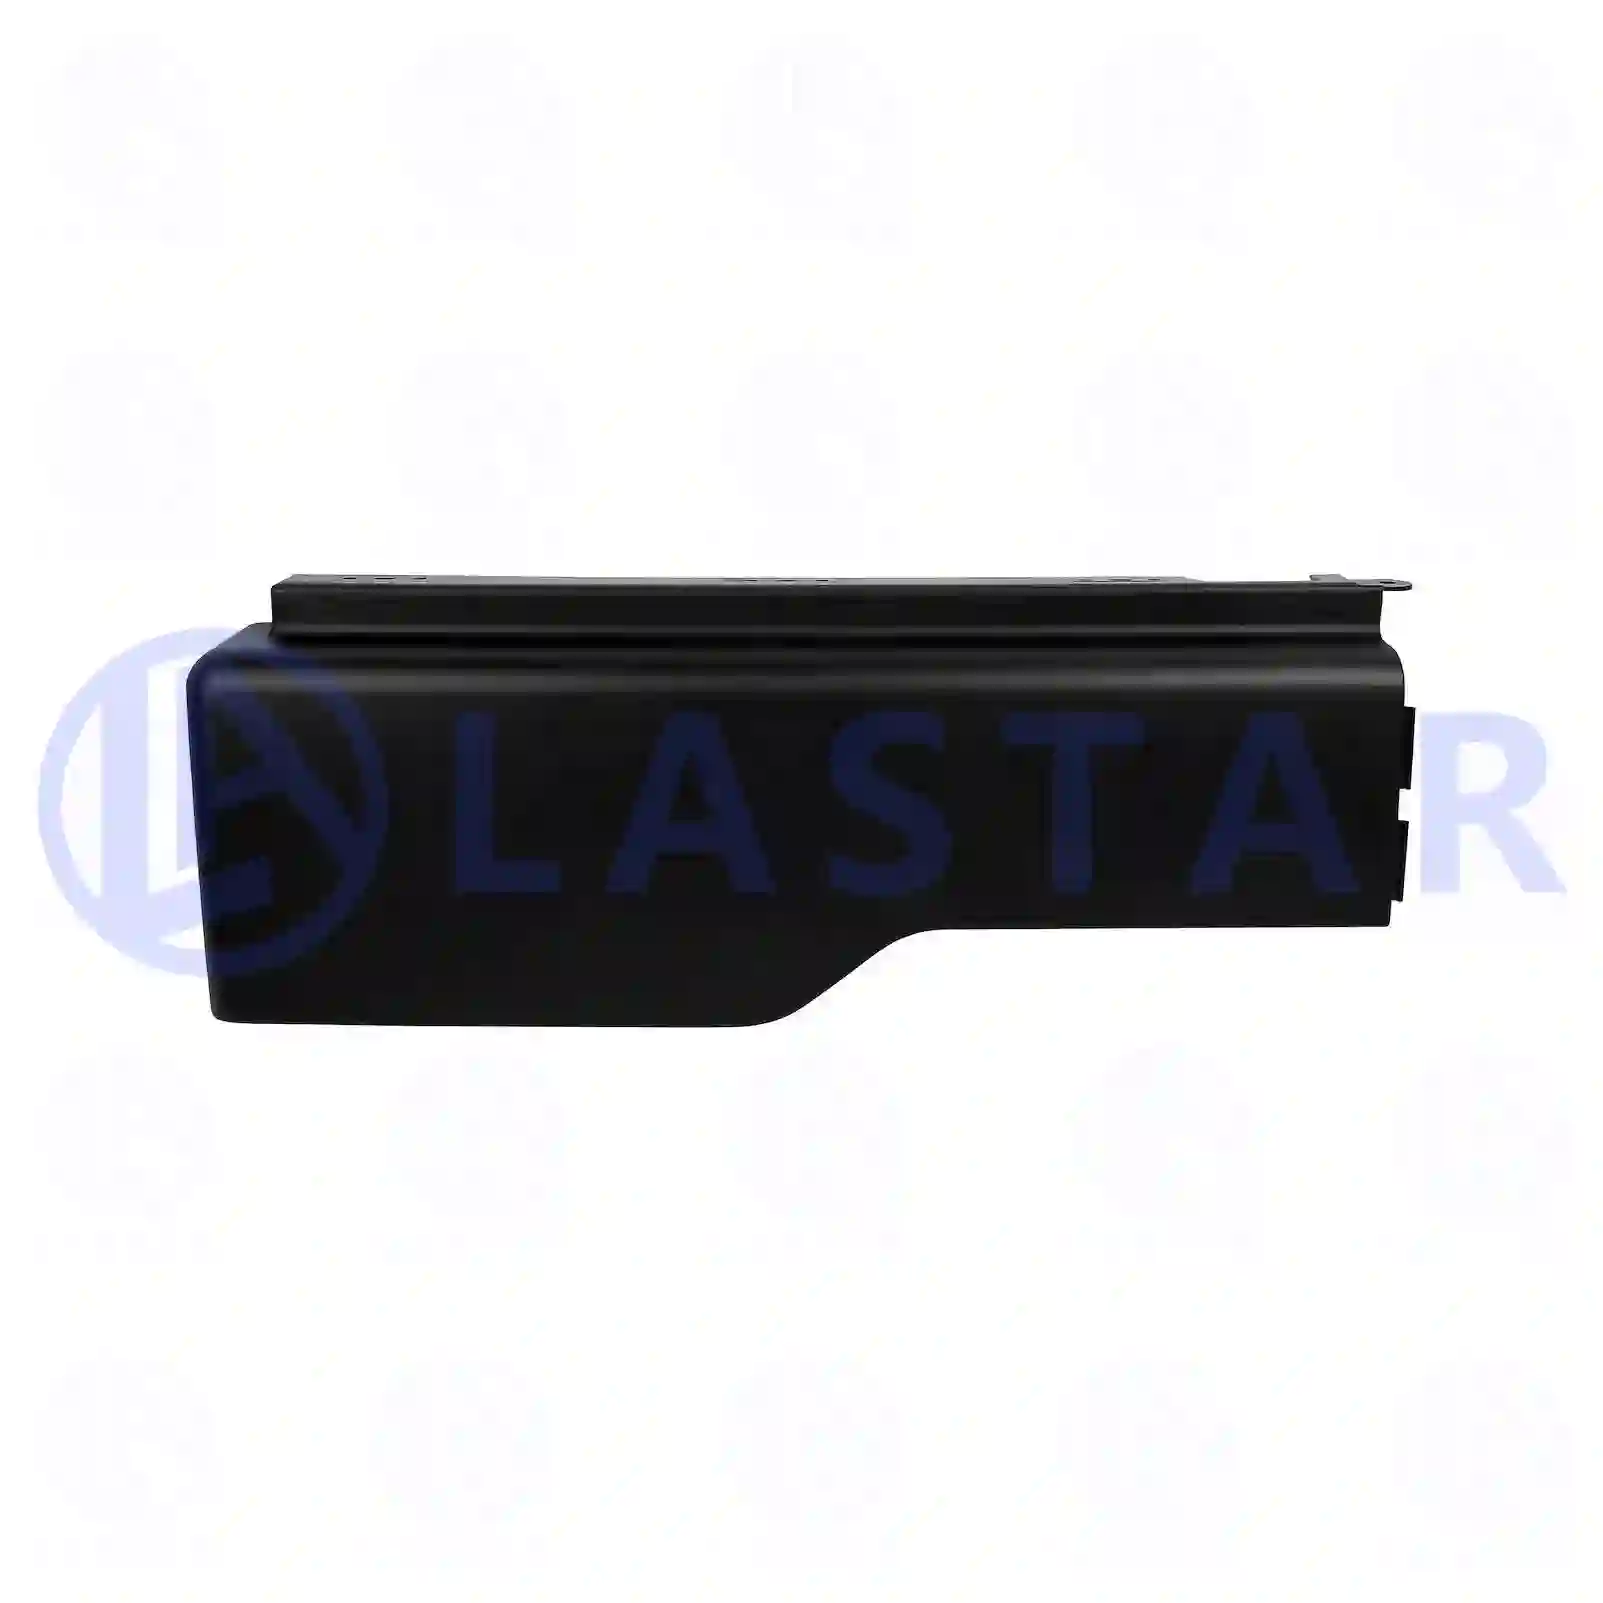 Fender extension, front, right, 77718070, 8141237, 8141239, ZG60758-0008 ||  77718070 Lastar Spare Part | Truck Spare Parts, Auotomotive Spare Parts Fender extension, front, right, 77718070, 8141237, 8141239, ZG60758-0008 ||  77718070 Lastar Spare Part | Truck Spare Parts, Auotomotive Spare Parts